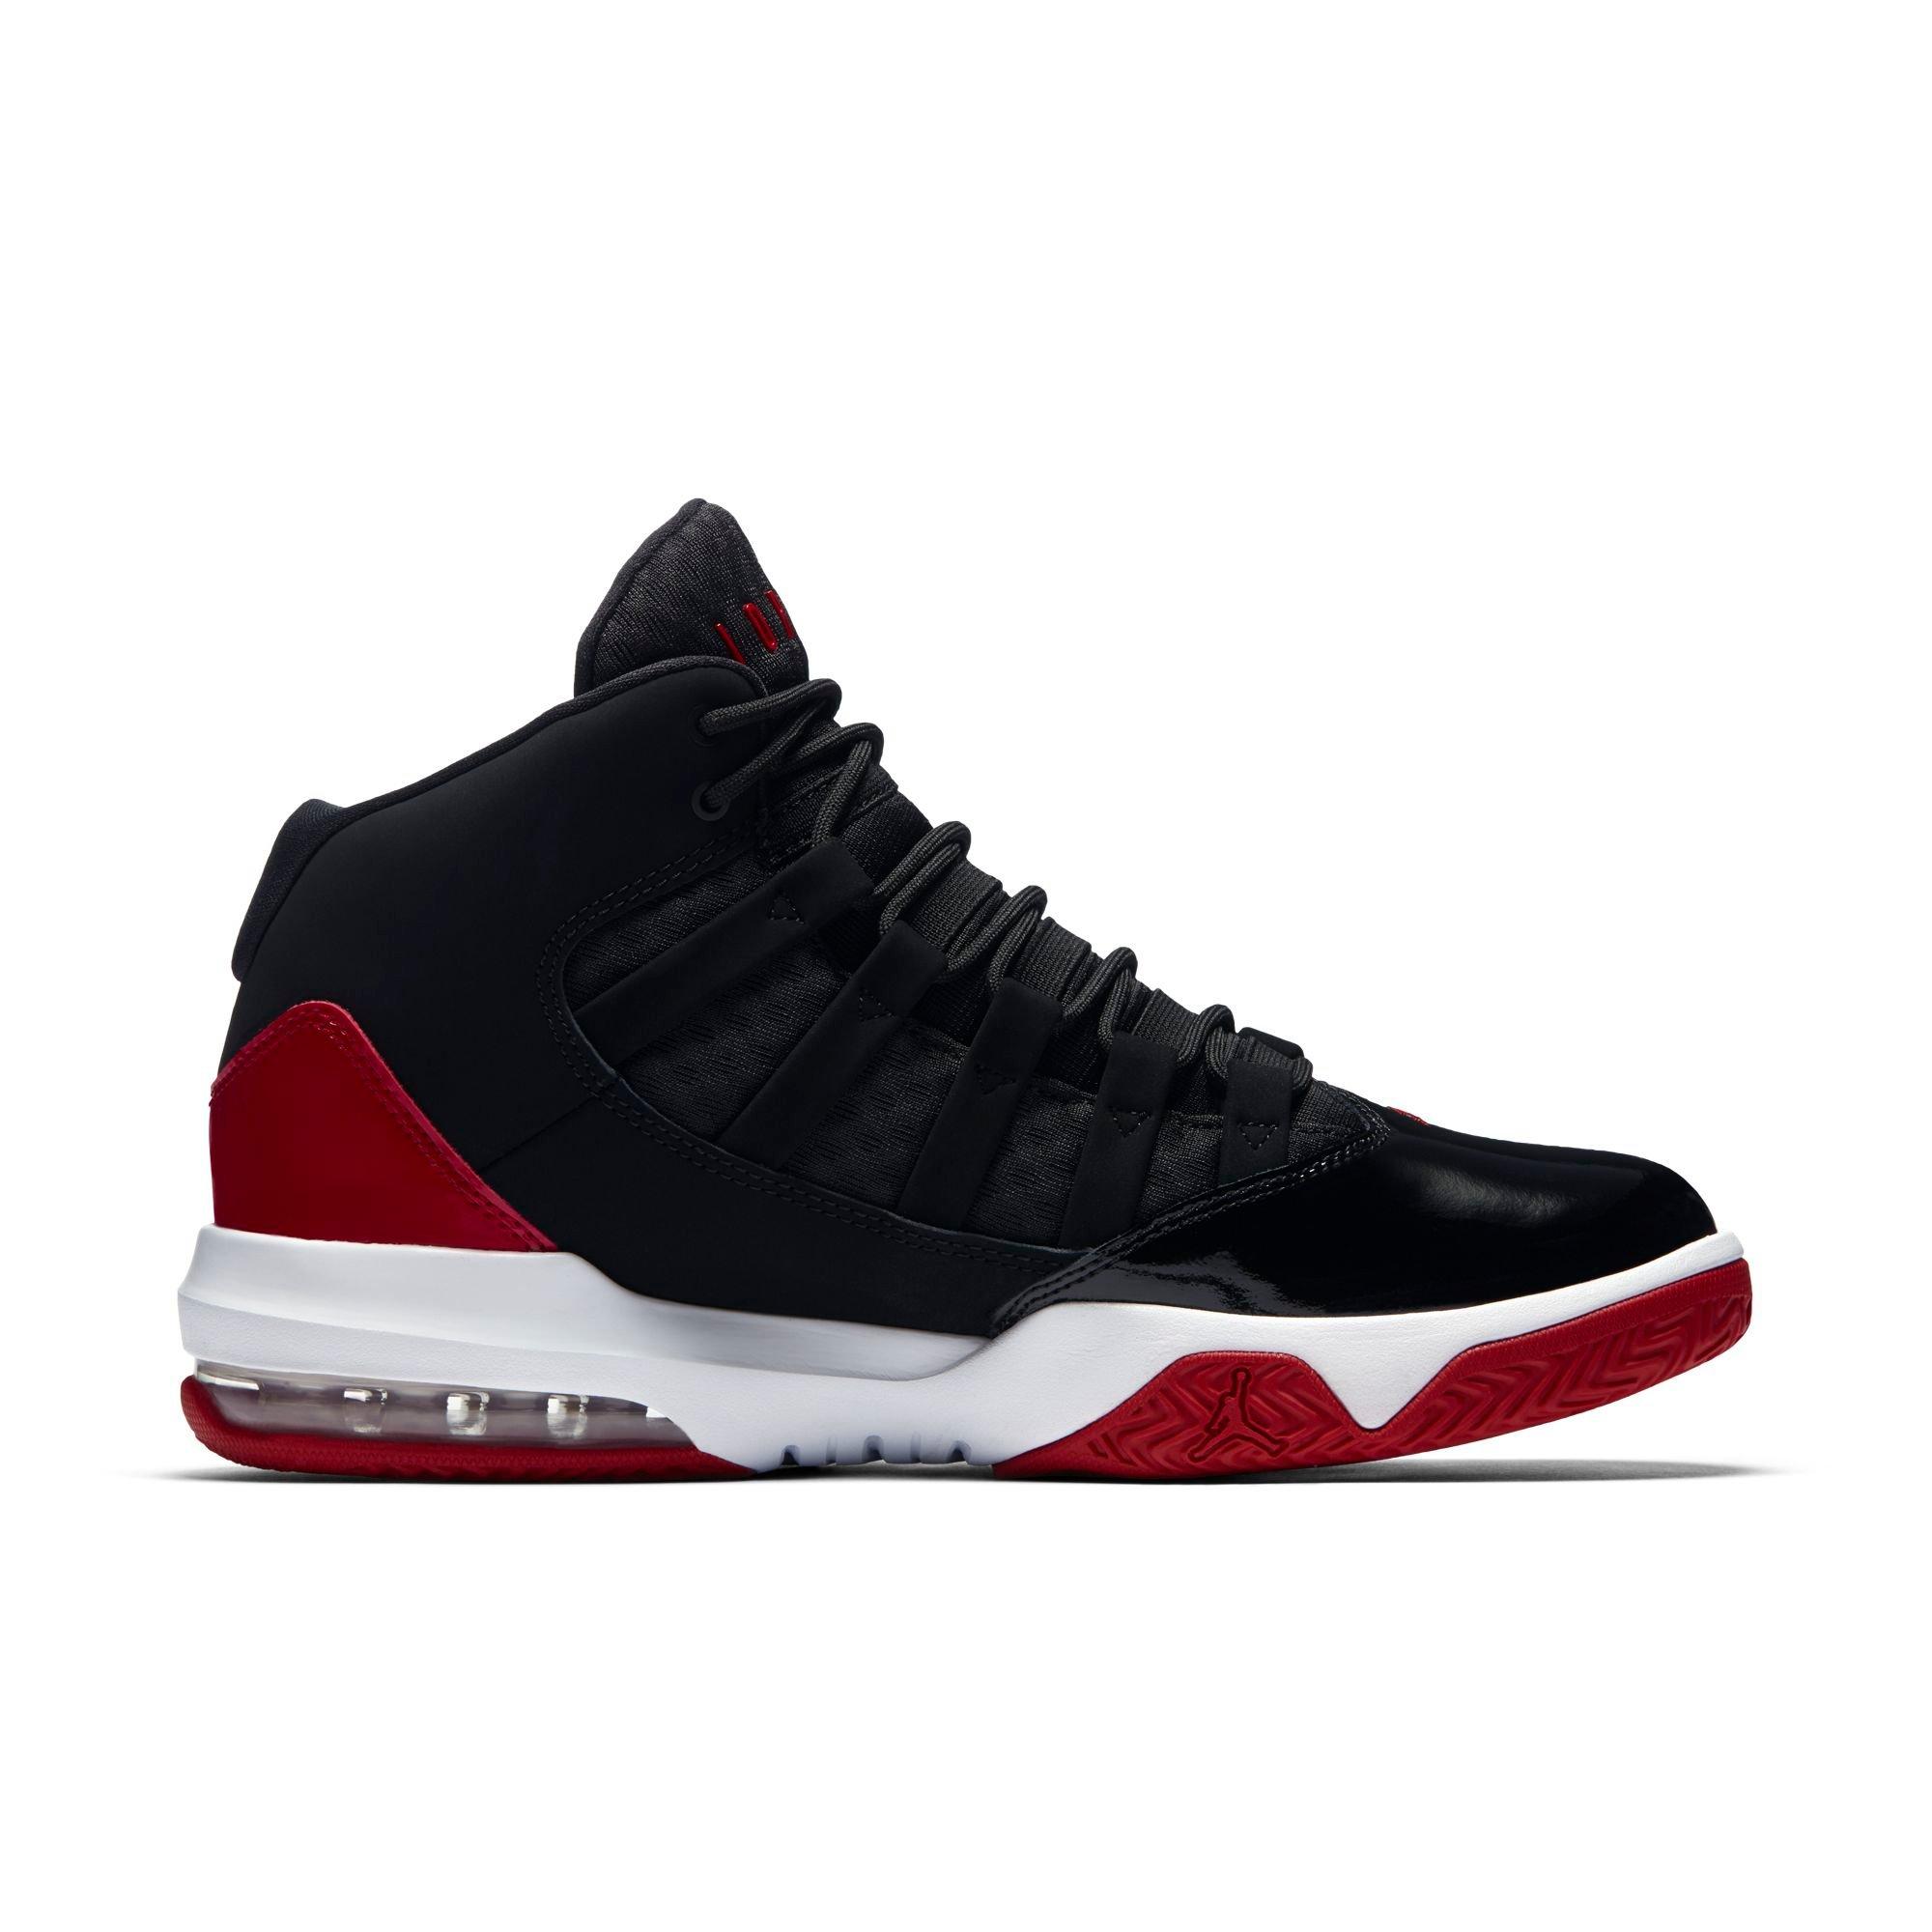 jordan shoes black and red